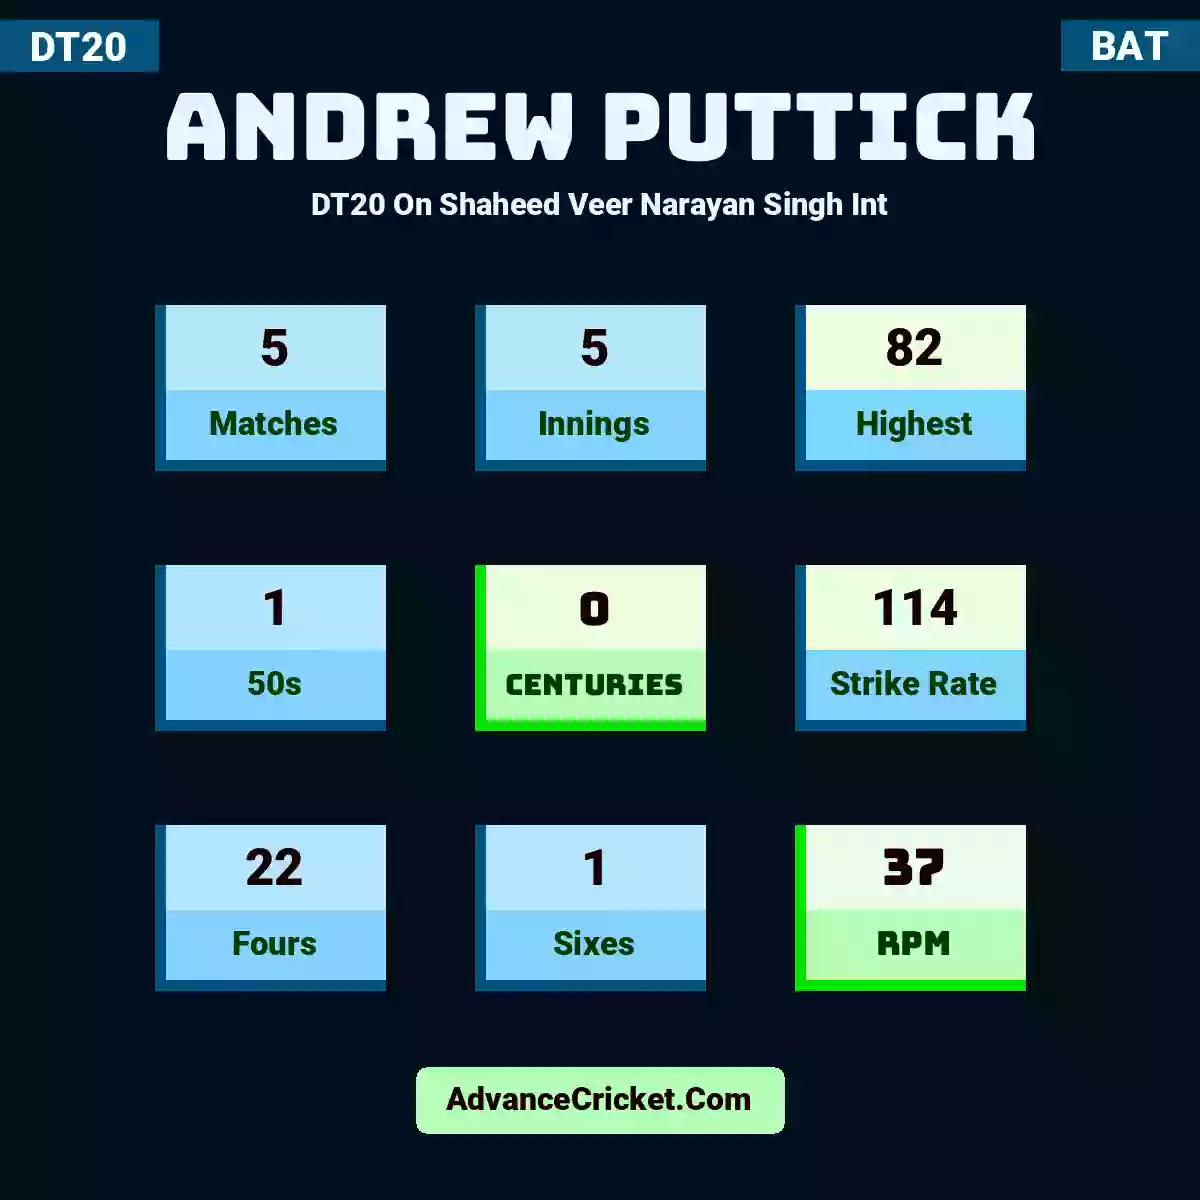 Andrew Puttick DT20  On Shaheed Veer Narayan Singh Int, Andrew Puttick played 5 matches, scored 82 runs as highest, 1 half-centuries, and 0 centuries, with a strike rate of 114. A.Puttick hit 22 fours and 1 sixes, with an RPM of 37.